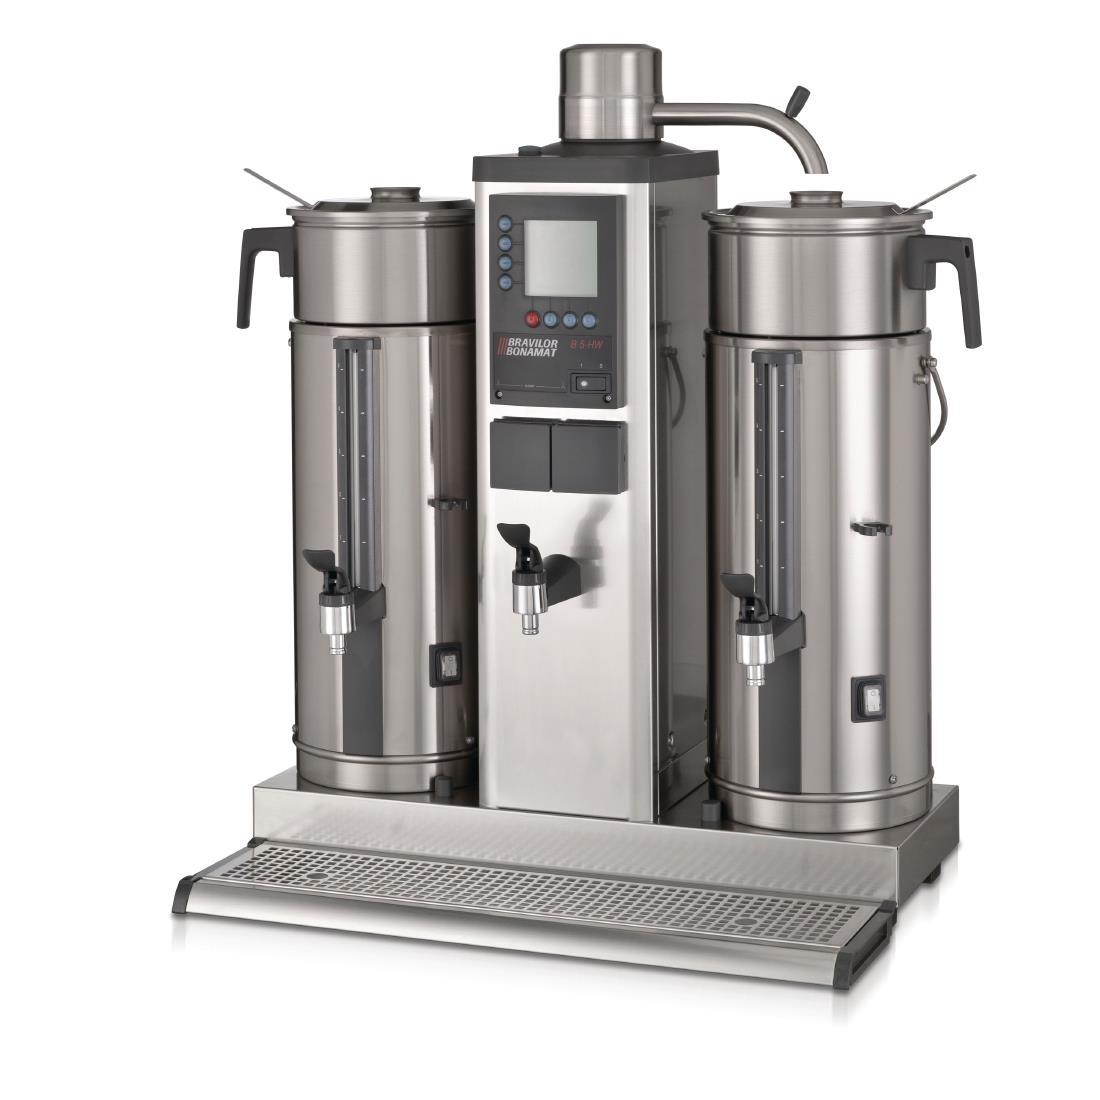 Bravilor B5 HW Bulk Coffee Brewer with 2x5Ltr Coffee Urns and Hot Water Tap Three Phase - DC687-3P  - 1